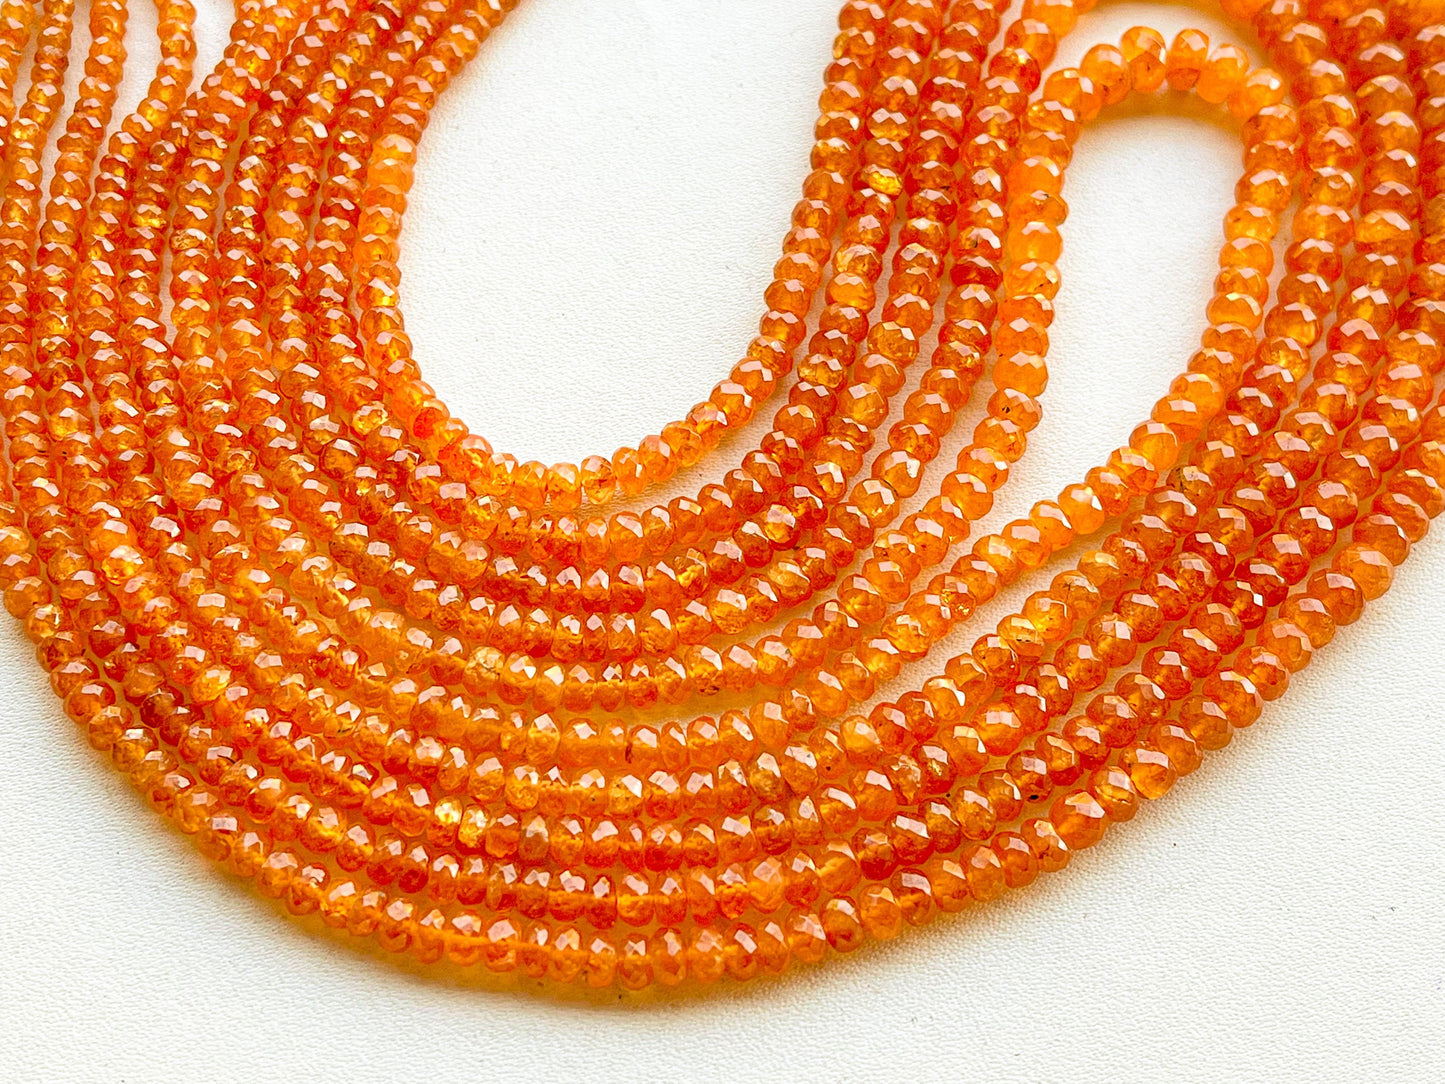 16 " Spessartite Garnet Faceted Rondelle Beads BFYJ234 - Beadsforyourjewelry